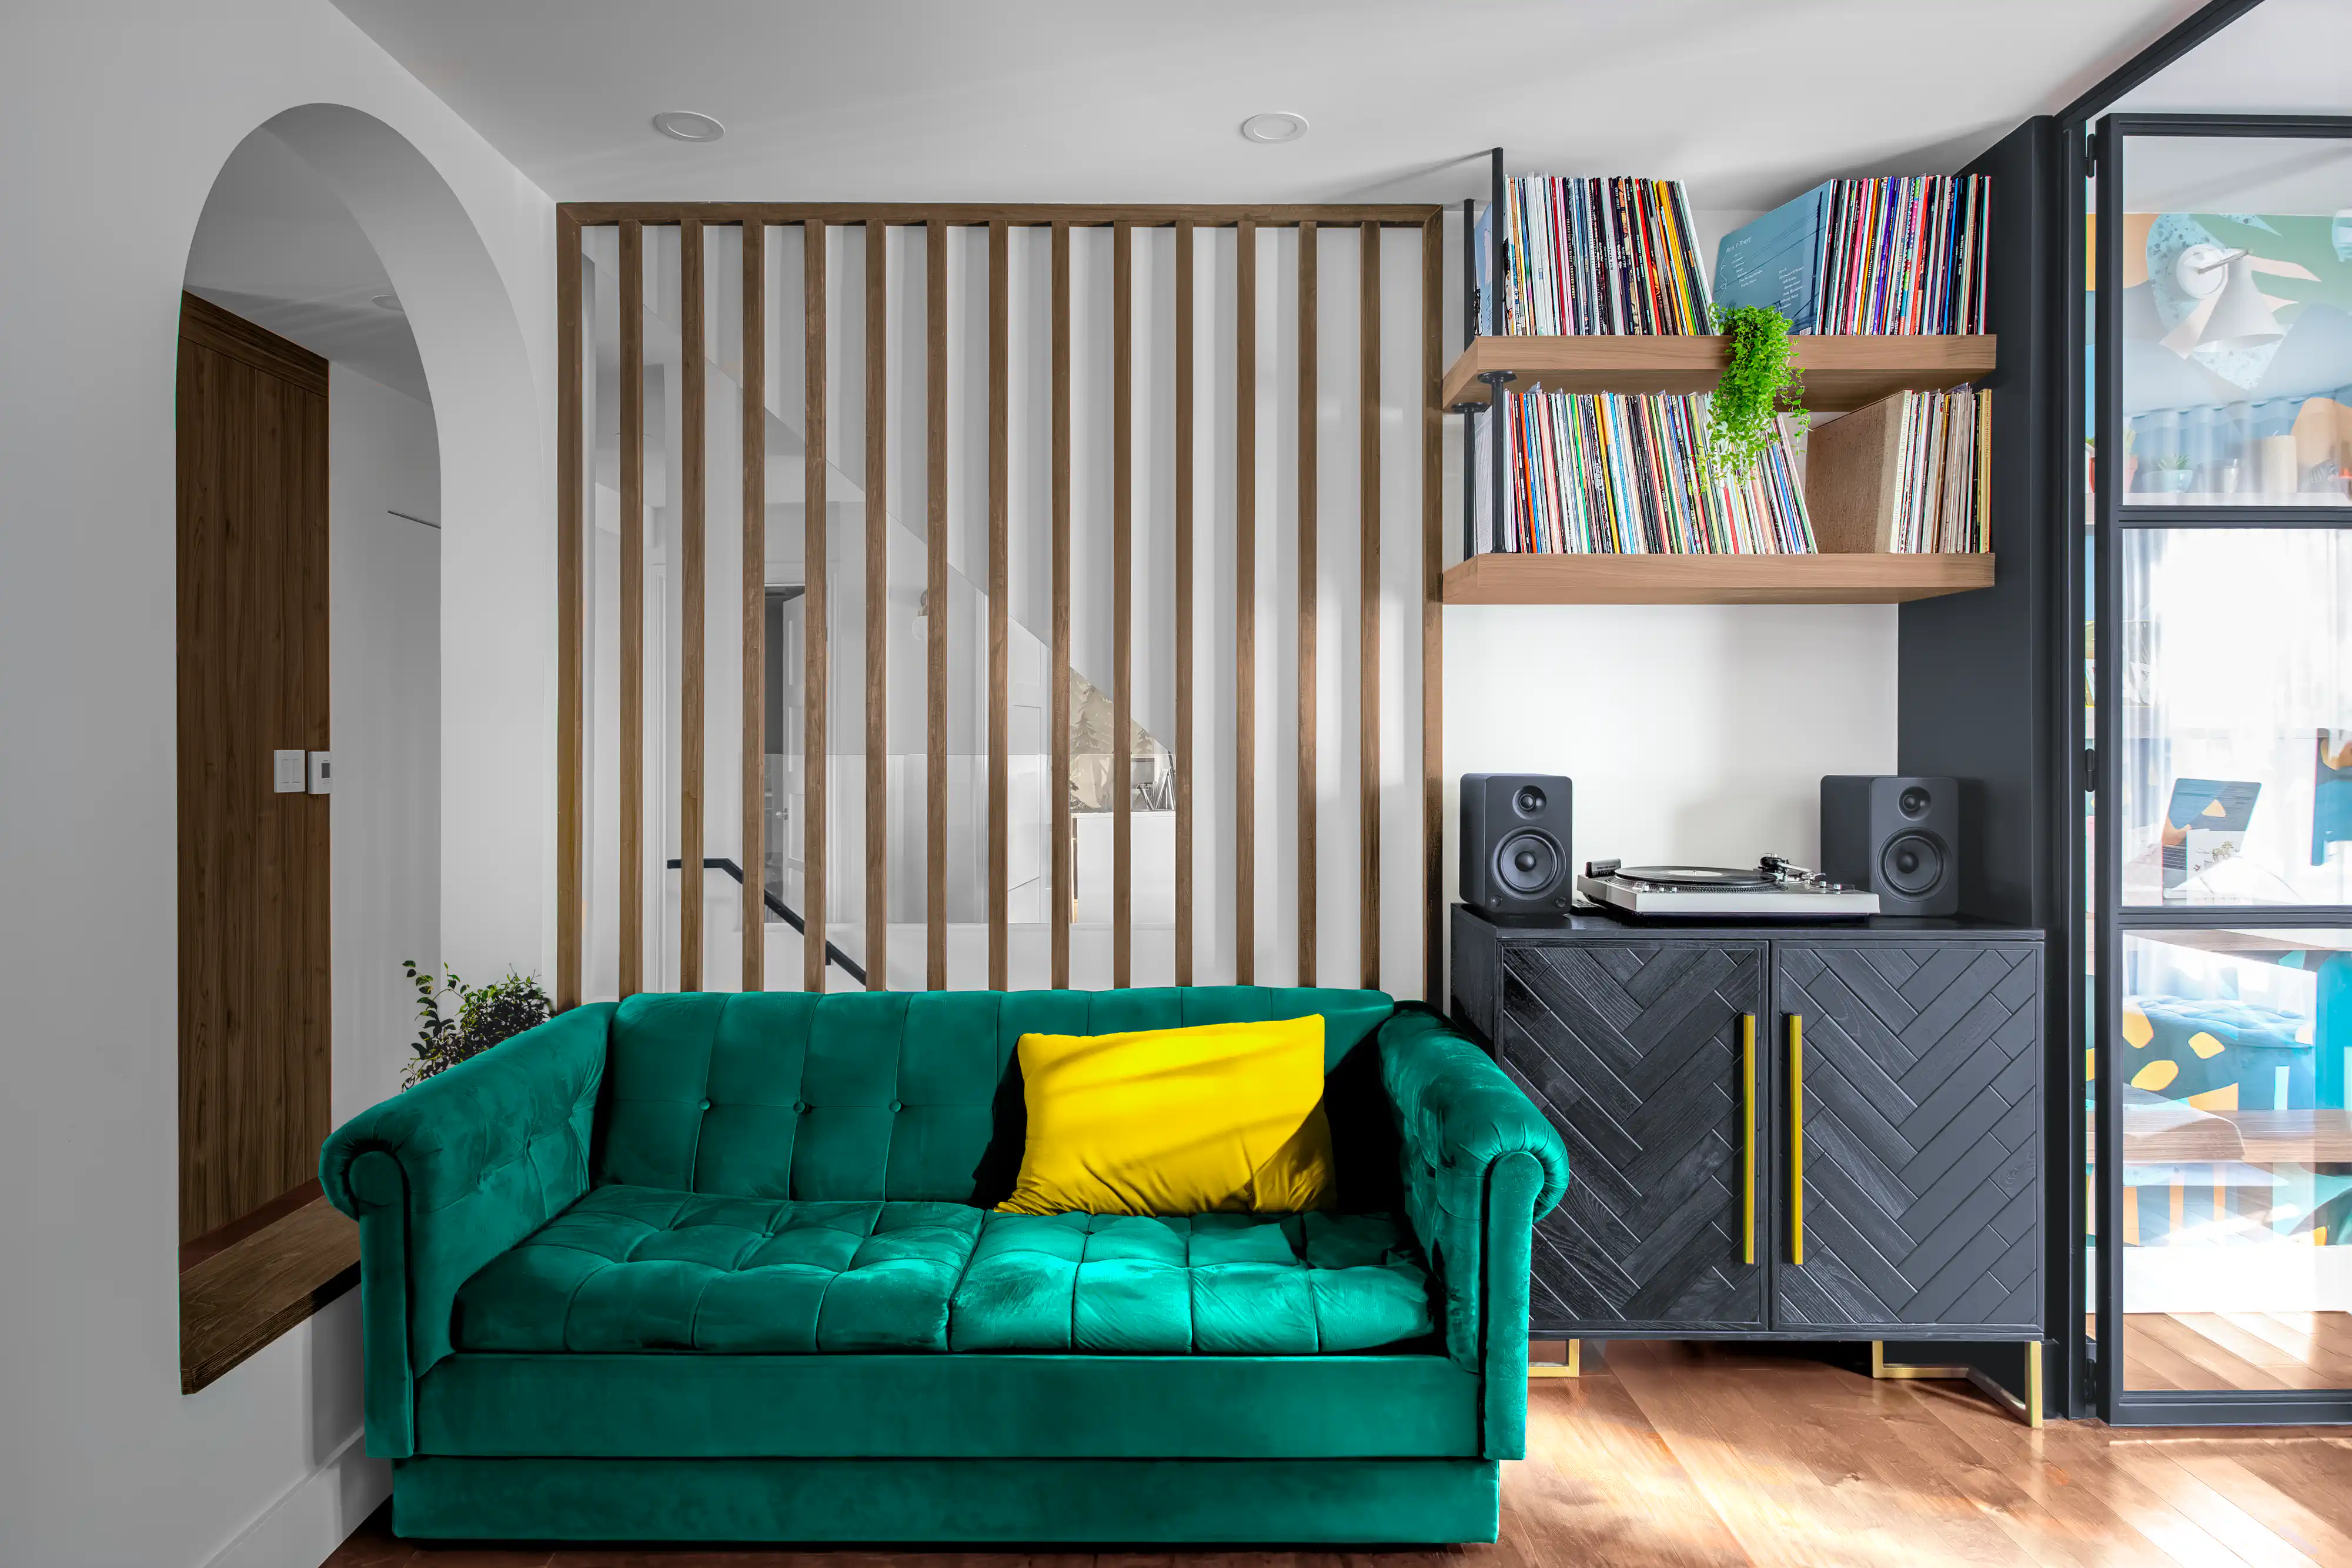 Contemporary living room with a green velvet sofa, wooden divider, and a bold yellow cushion, interior by Sarah Brown Design